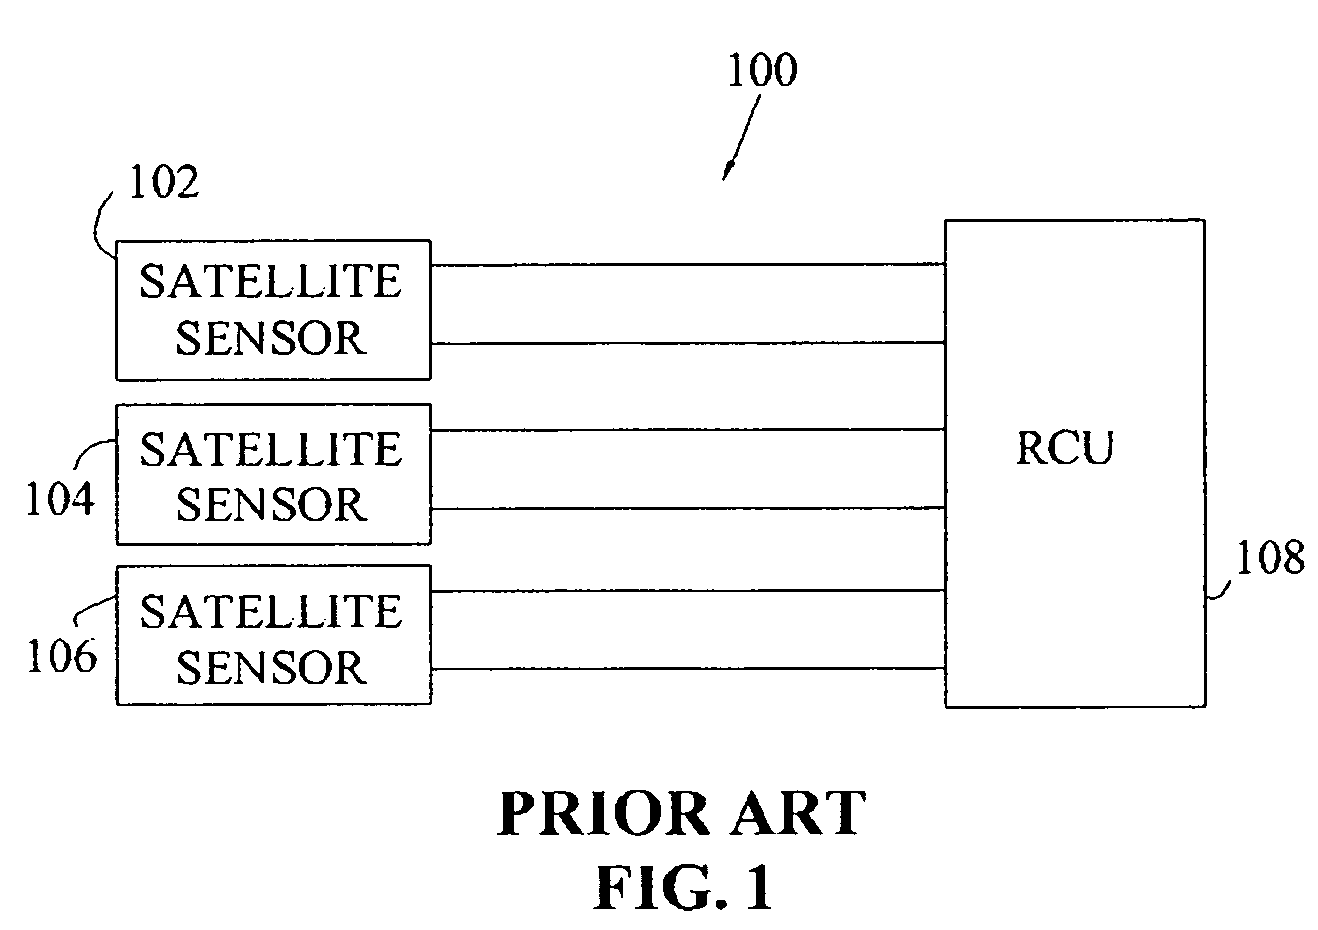 Method for multiple sensors to communicate on a uni-directional bus